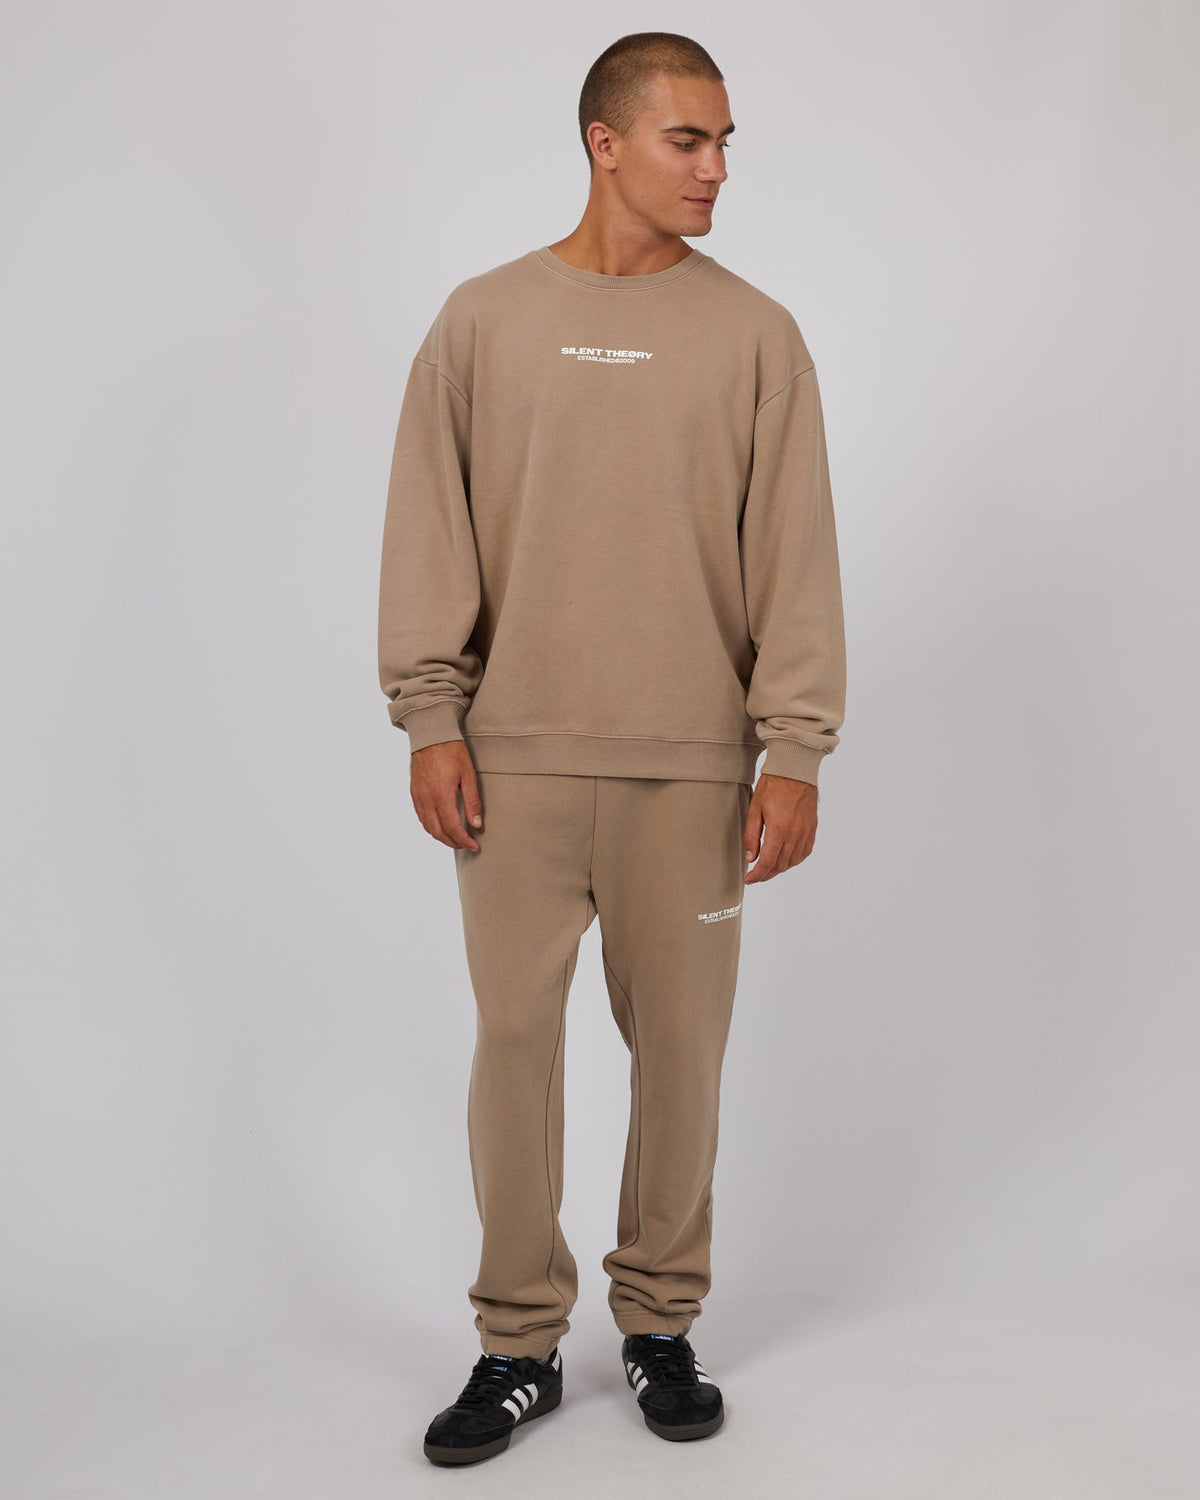 Silent Theory-Essential Theory Crew Tan-Edge Clothing